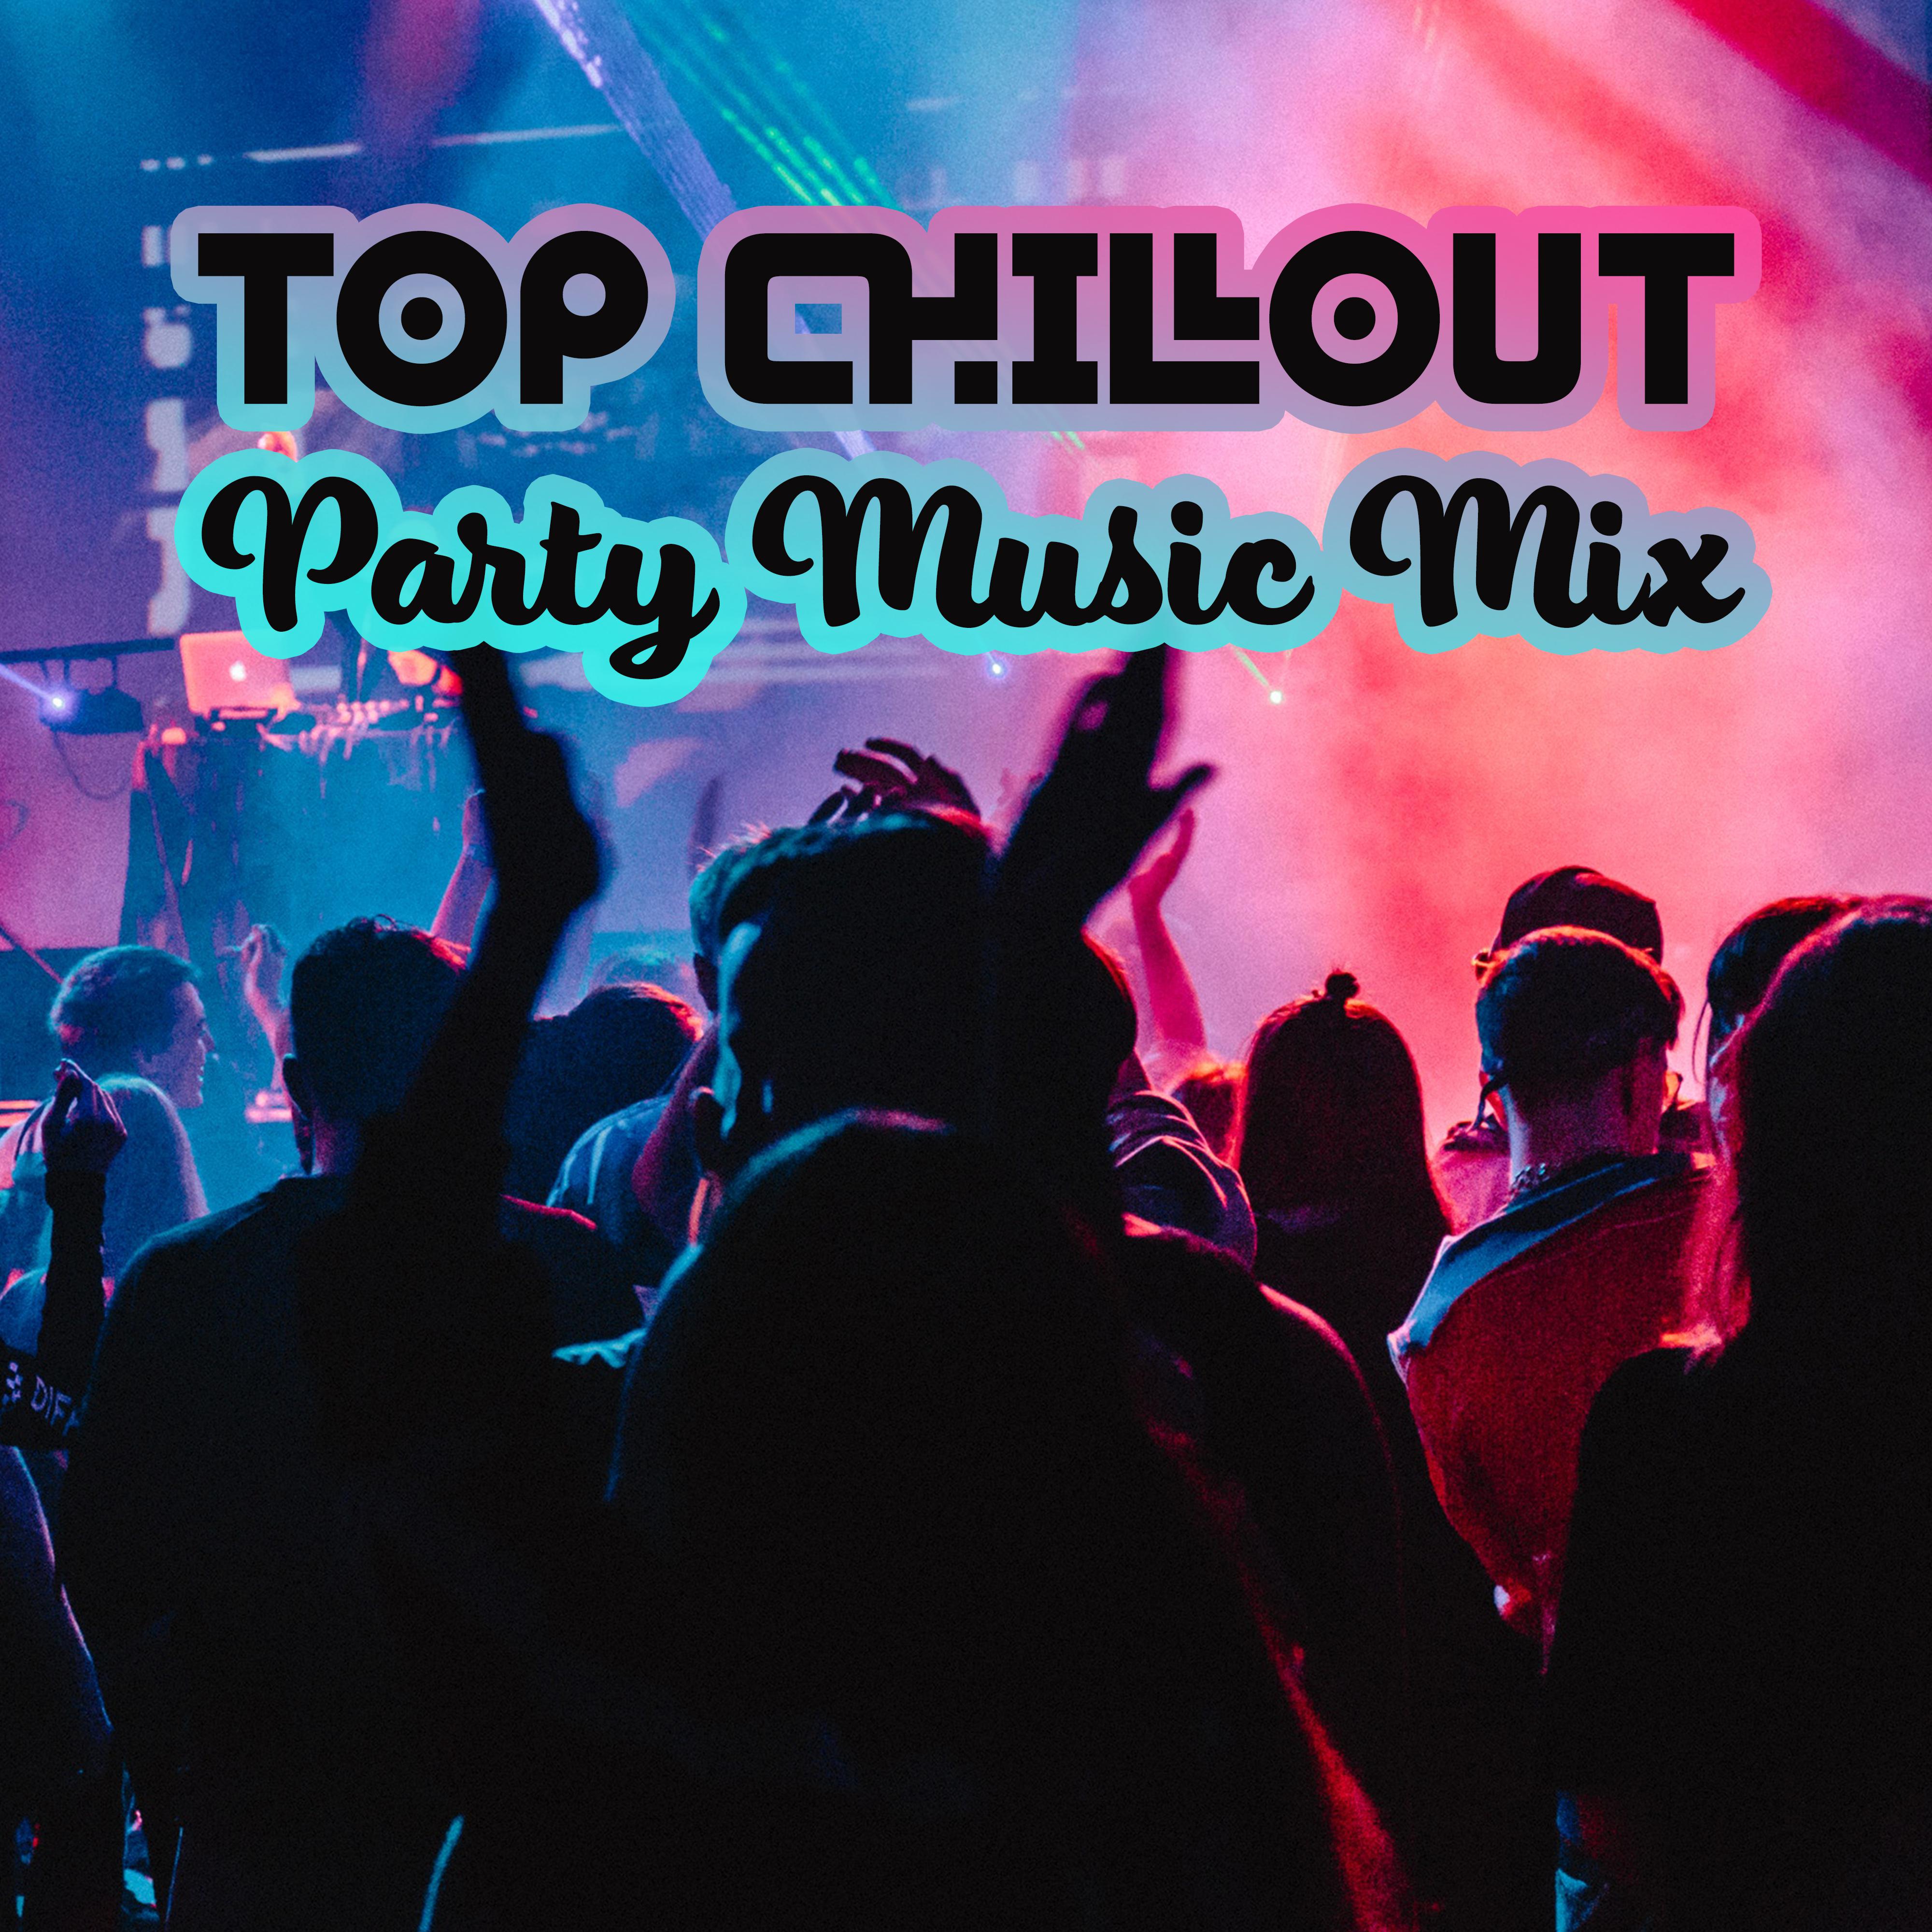 Top Chillout Party Music Mix: Selection for Chill Out Dance Vibes, After Party Soft Melodies